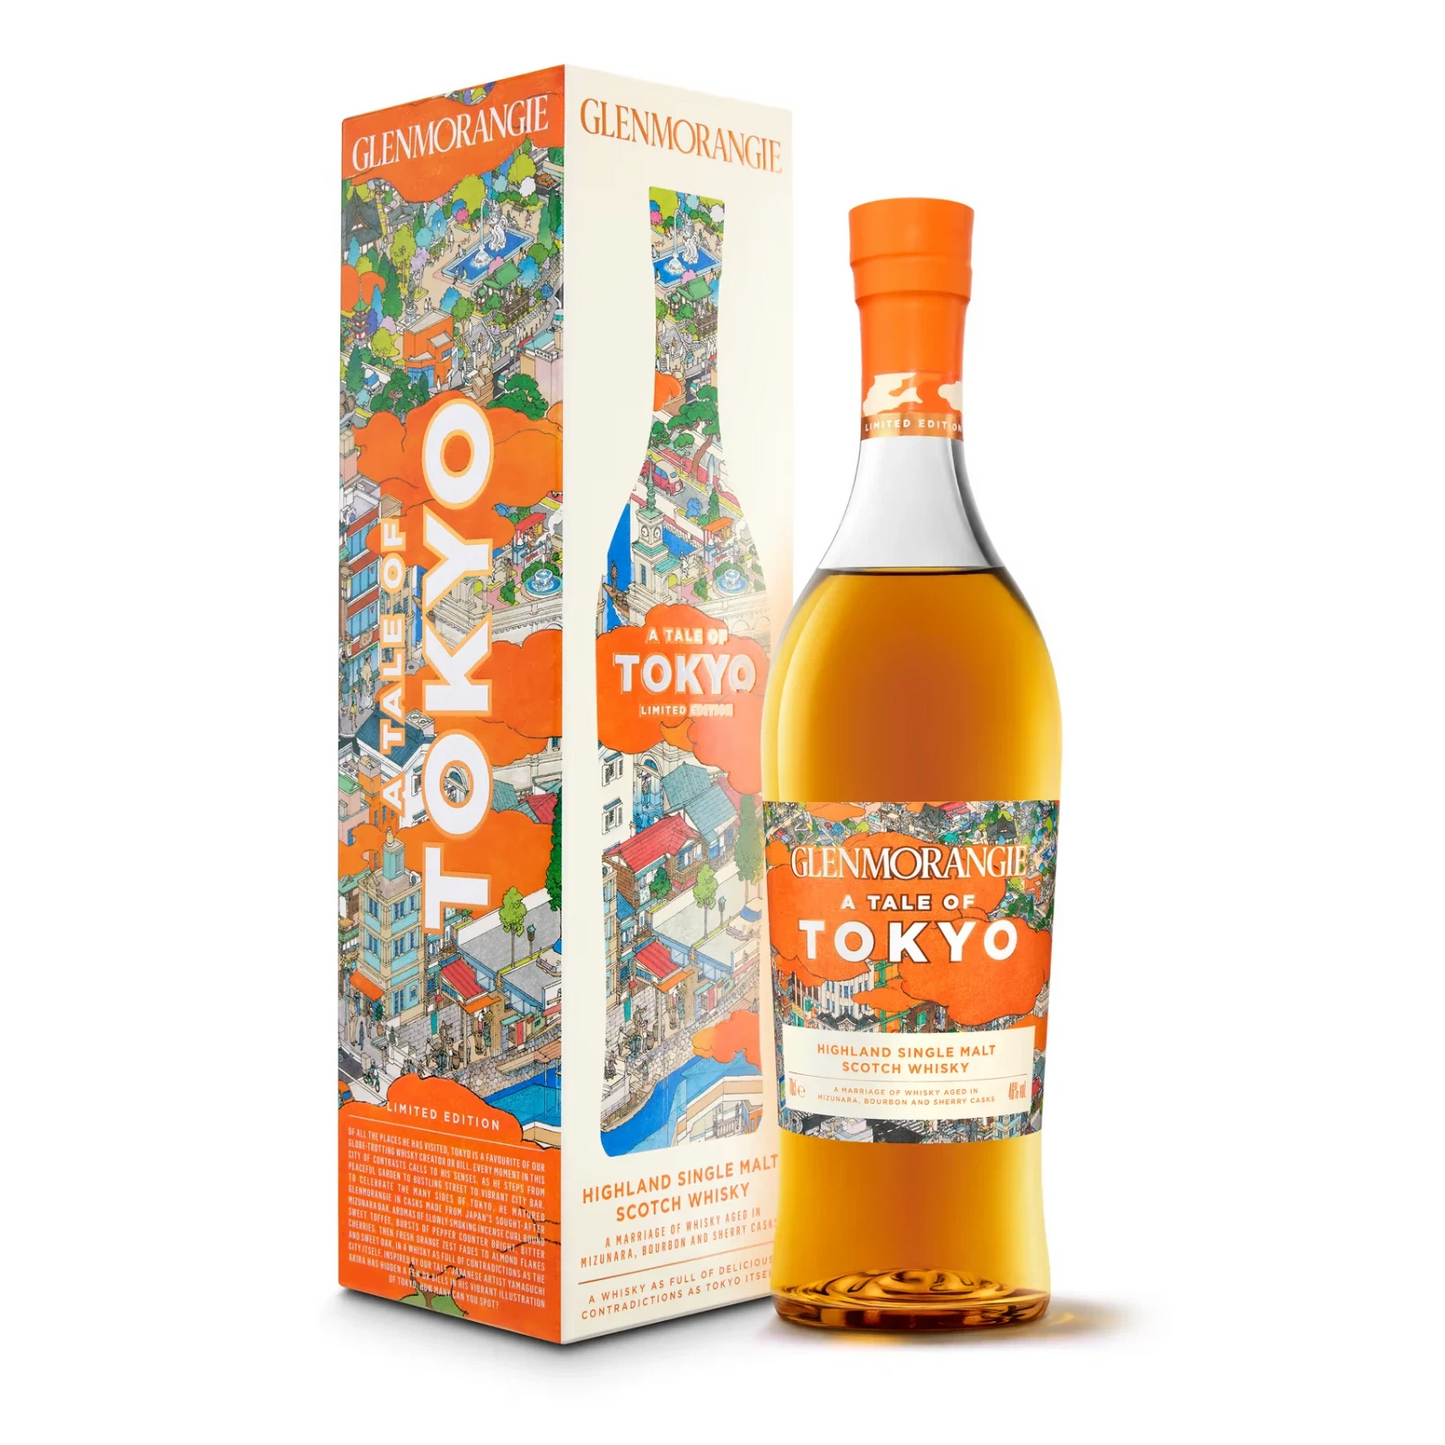 Glenmorangie - A Tale Of Tokyo Limited Edition - Single Malt Scotch Whisky-Single Malt Scotch Whisky-5010494985498-Fountainhall Wines